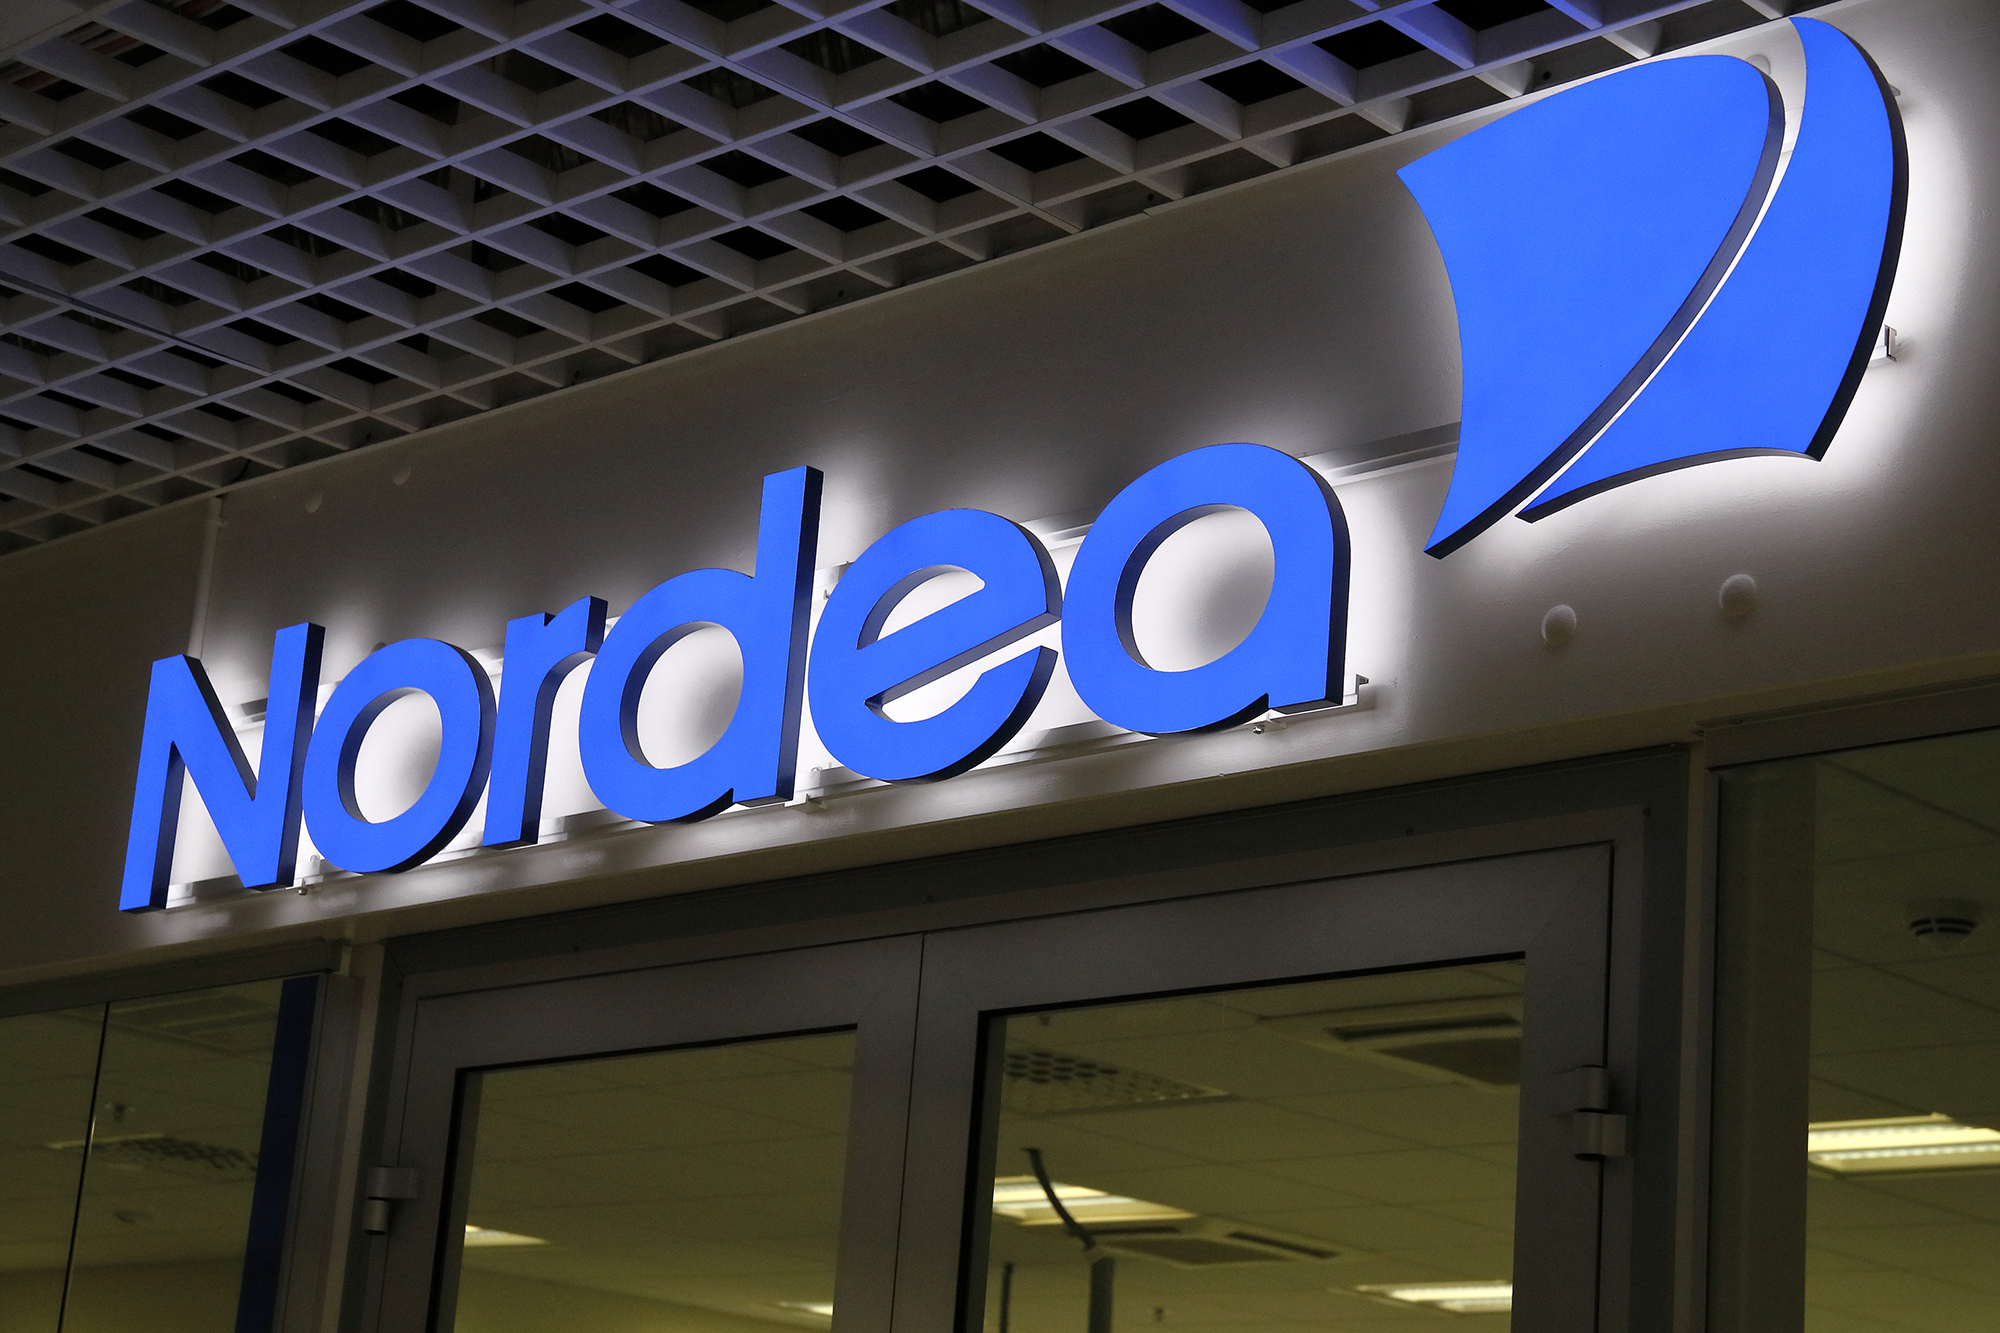 Please note: Nordea’s cards and services are offline most of Sunday